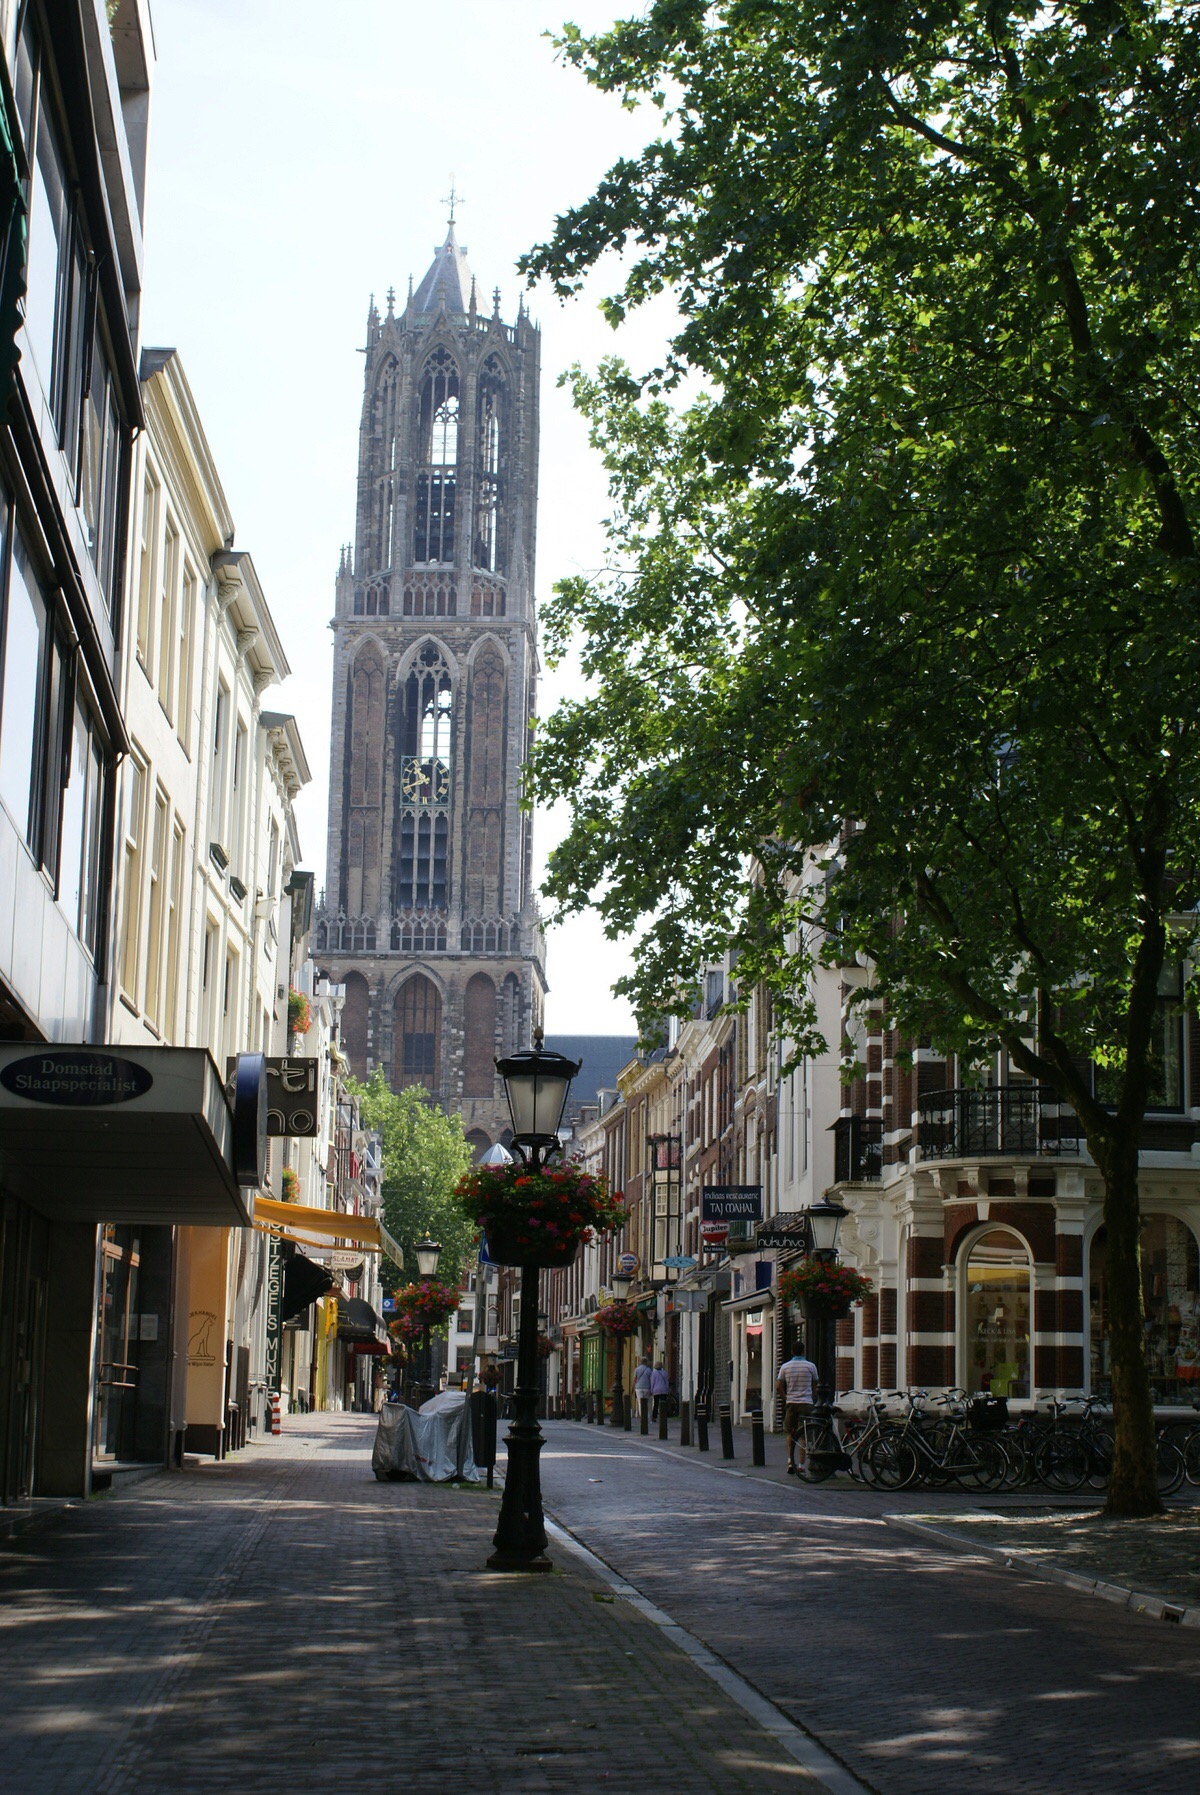 Dom tower